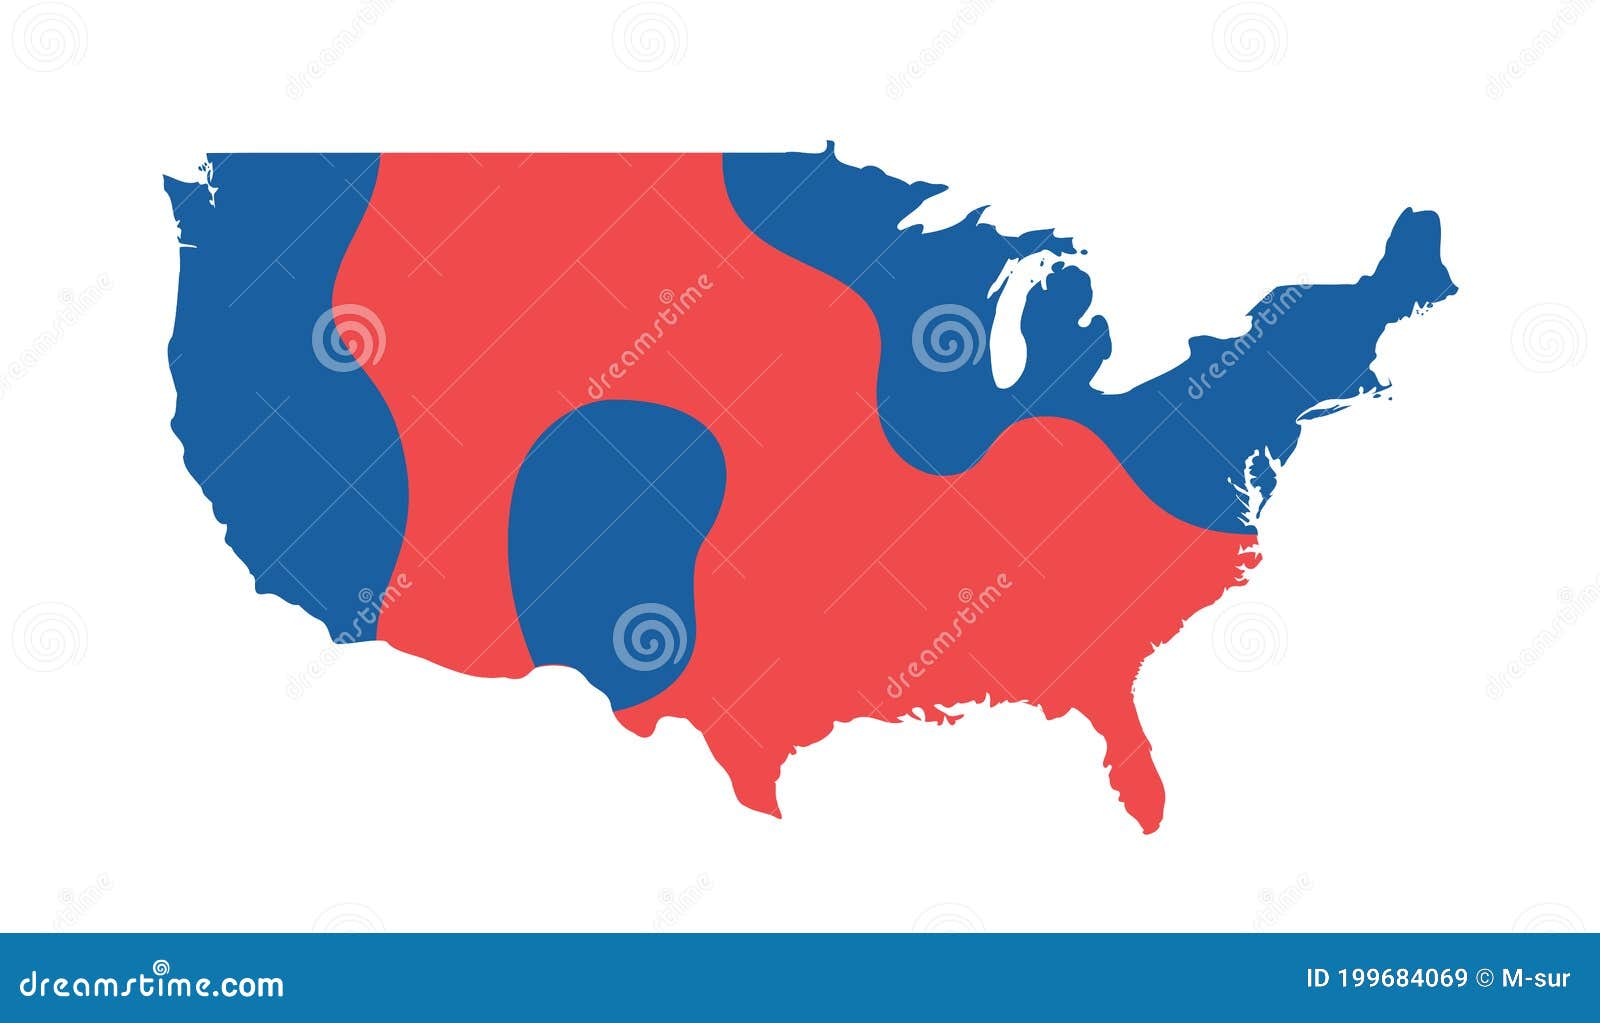 Political Map Of Usa Red And Blue States United States Map | Sexiz Pix